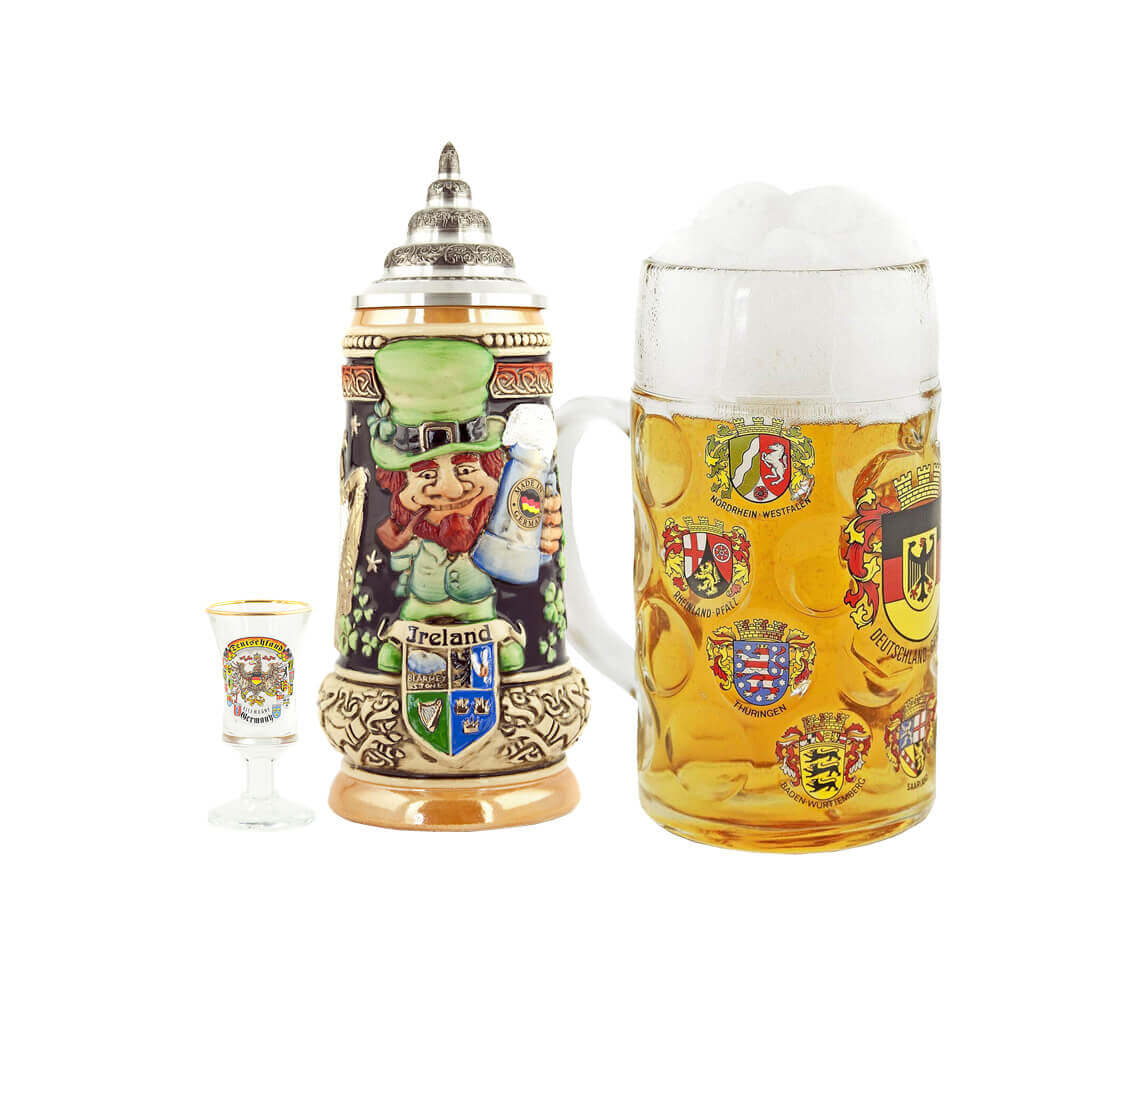 Find Your Authentic German Beer Steins & Glassware here at Our Store ...